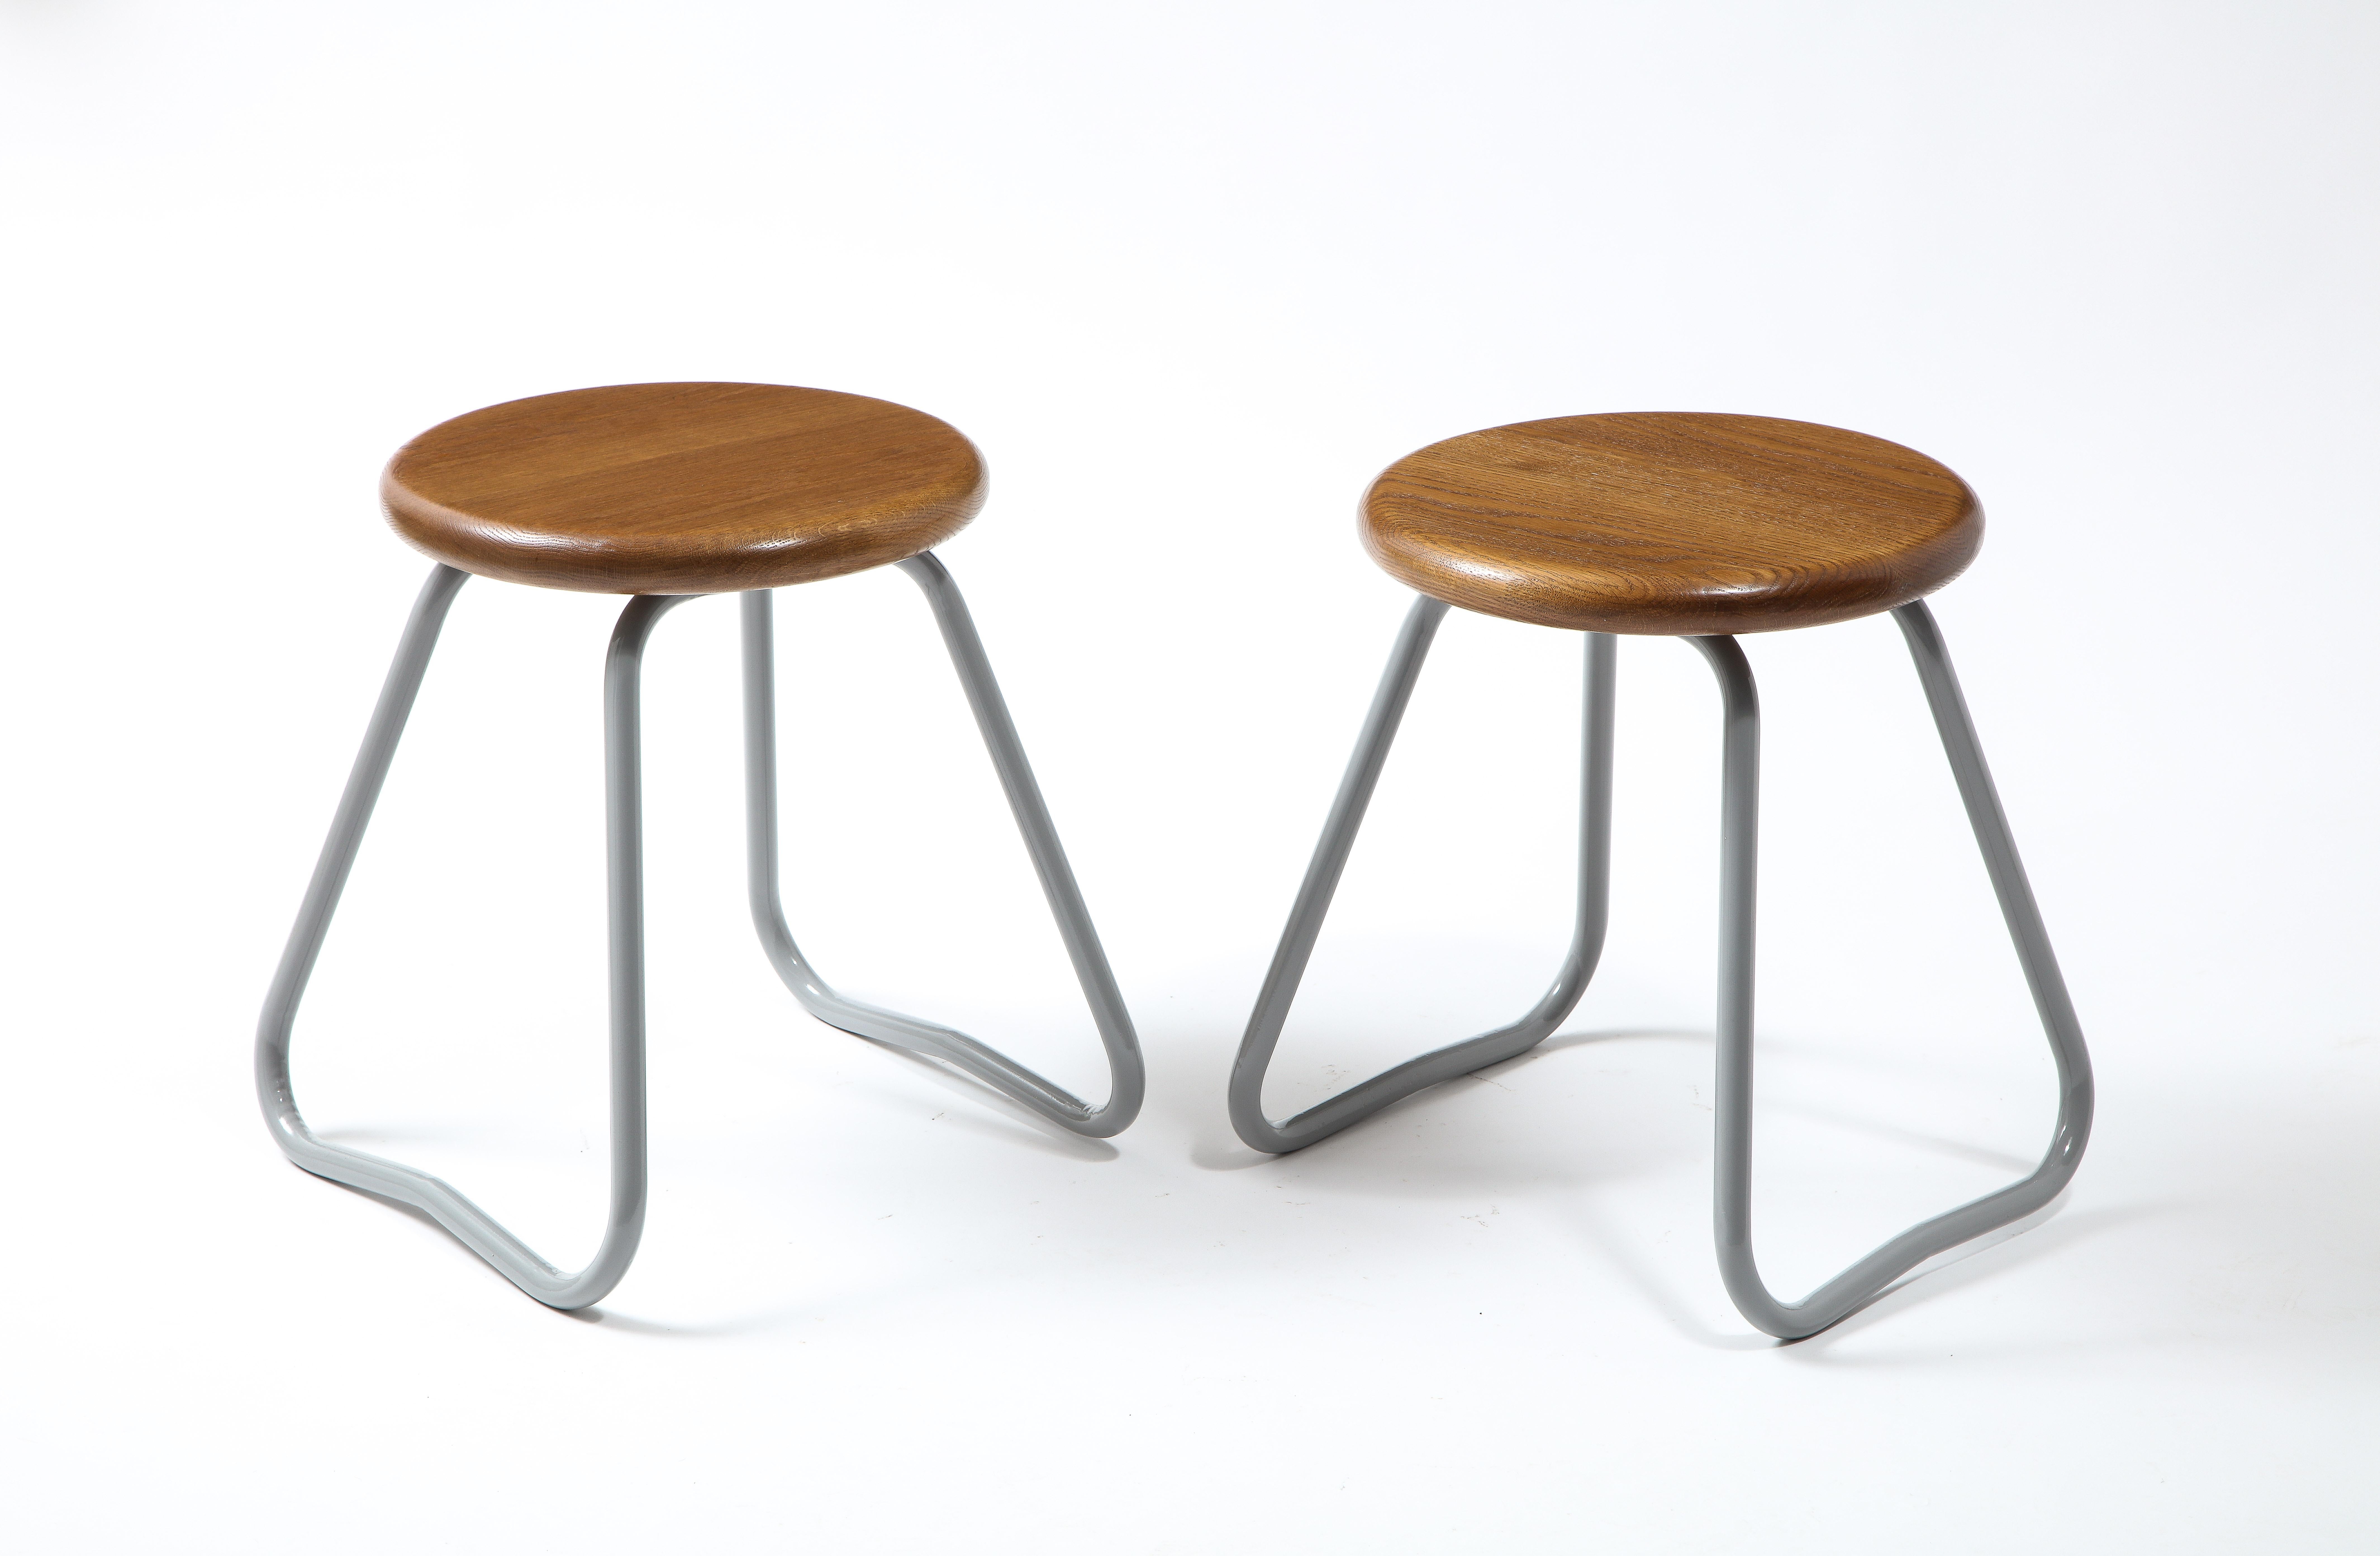 Pair of bent steel tubing stools enameled grey with newly refinished oak tops.